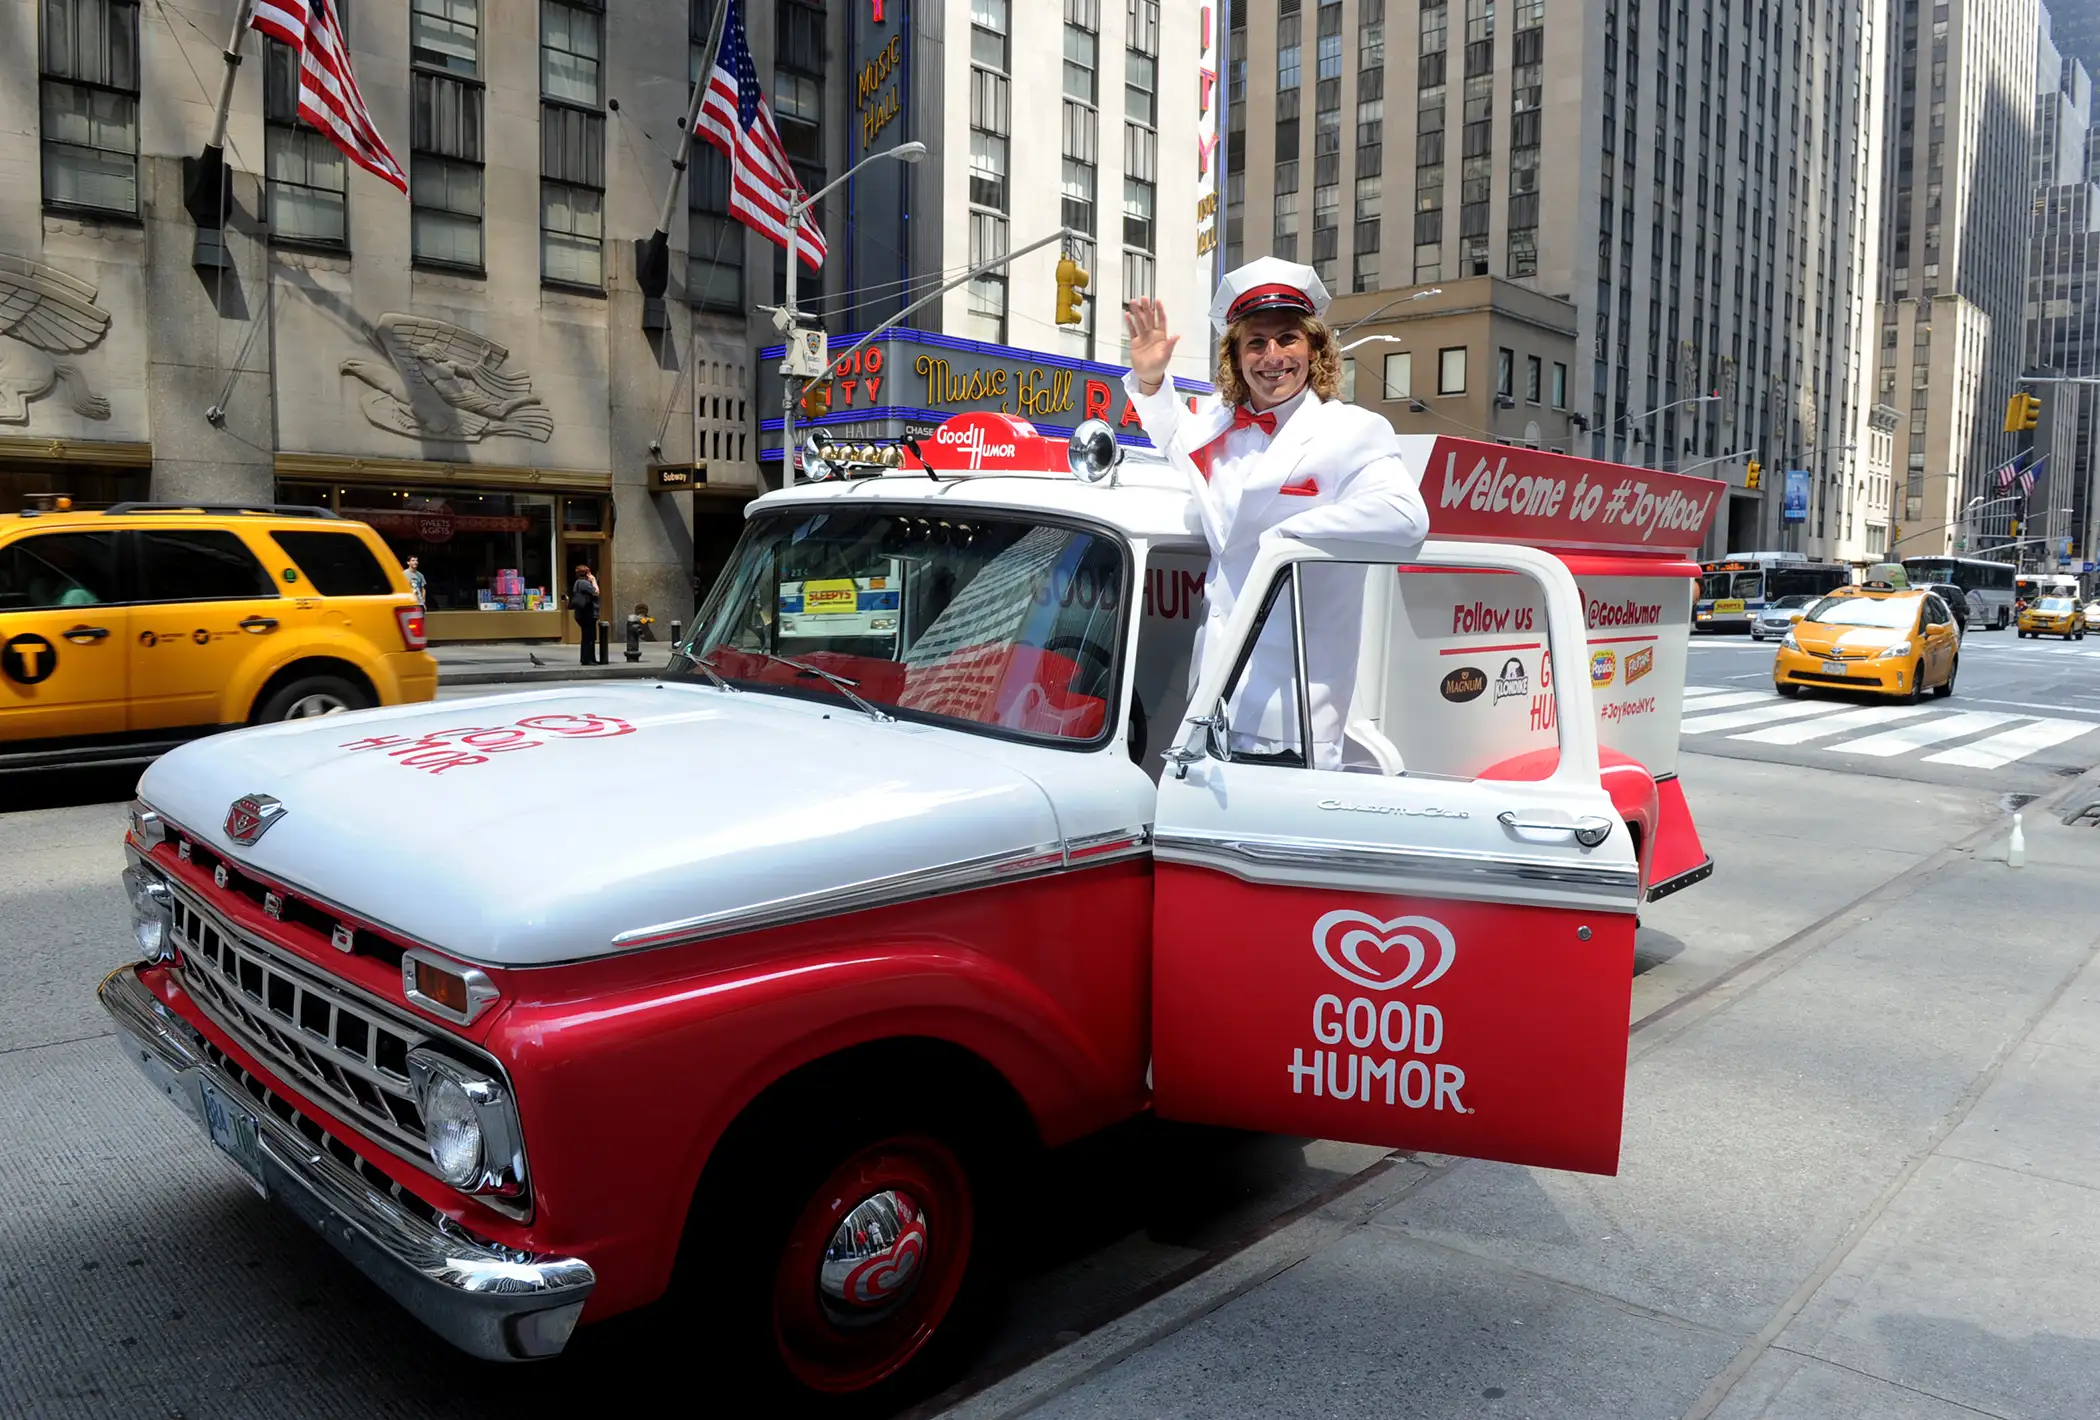 Unveiling of The Good Humor Joy Squad and launch of the Good Humor Welcome to Joyhood campaign,Thursday, June 25, 2015, in New York.